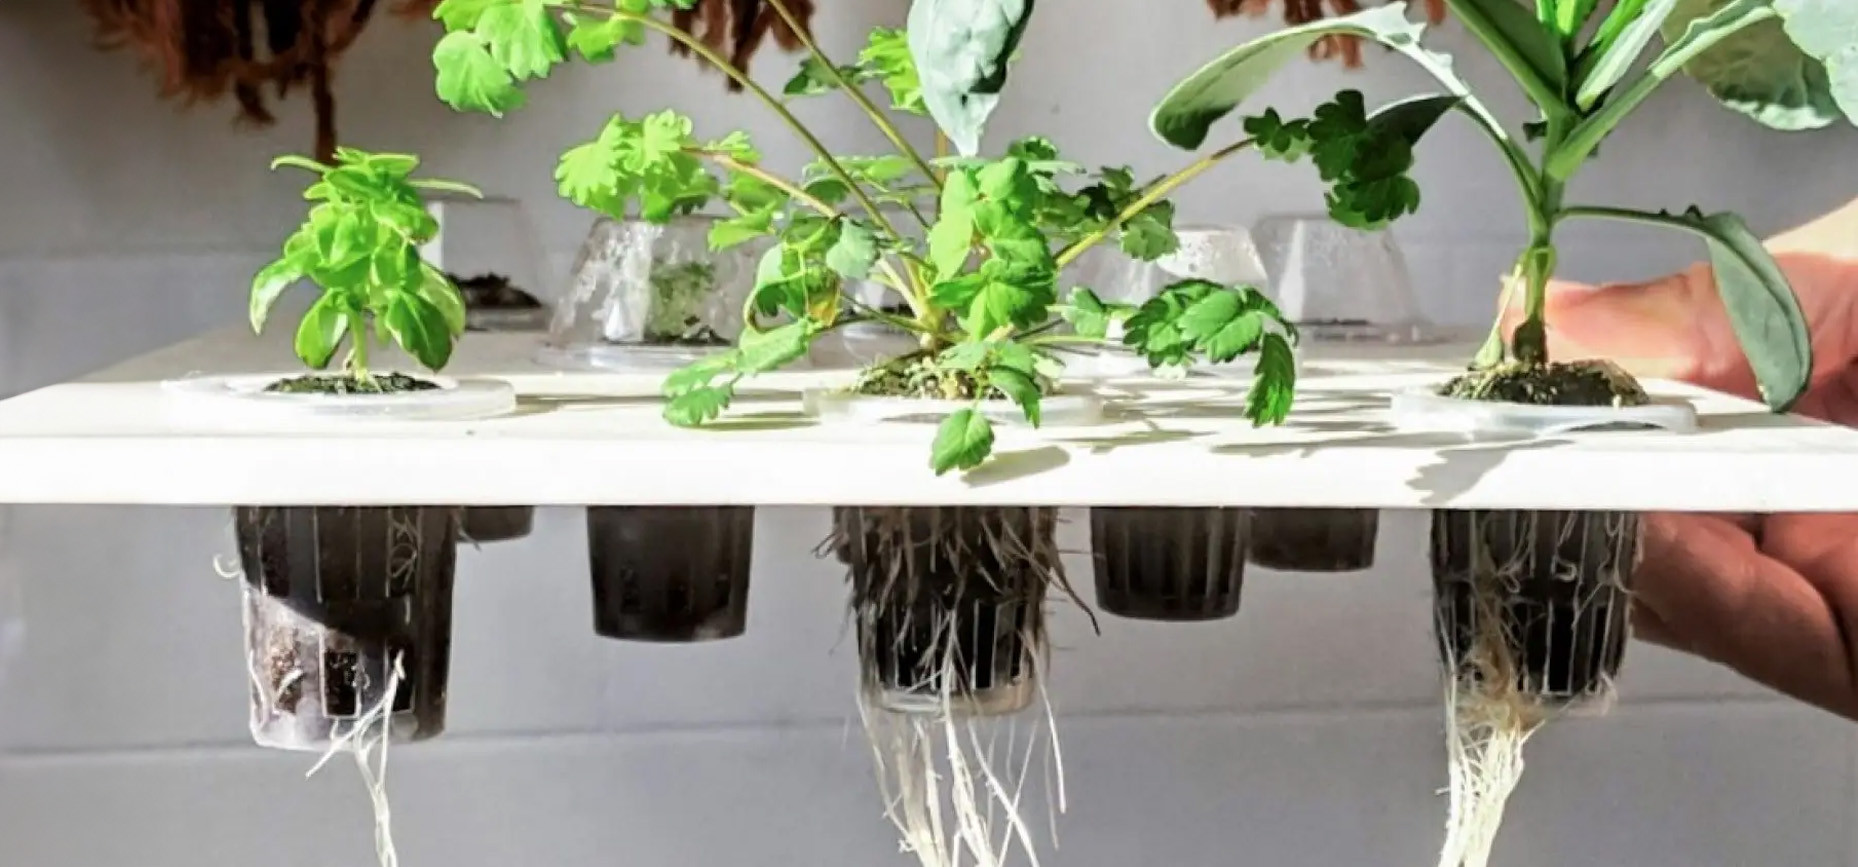 The different hydroponic growing systems in horticulture